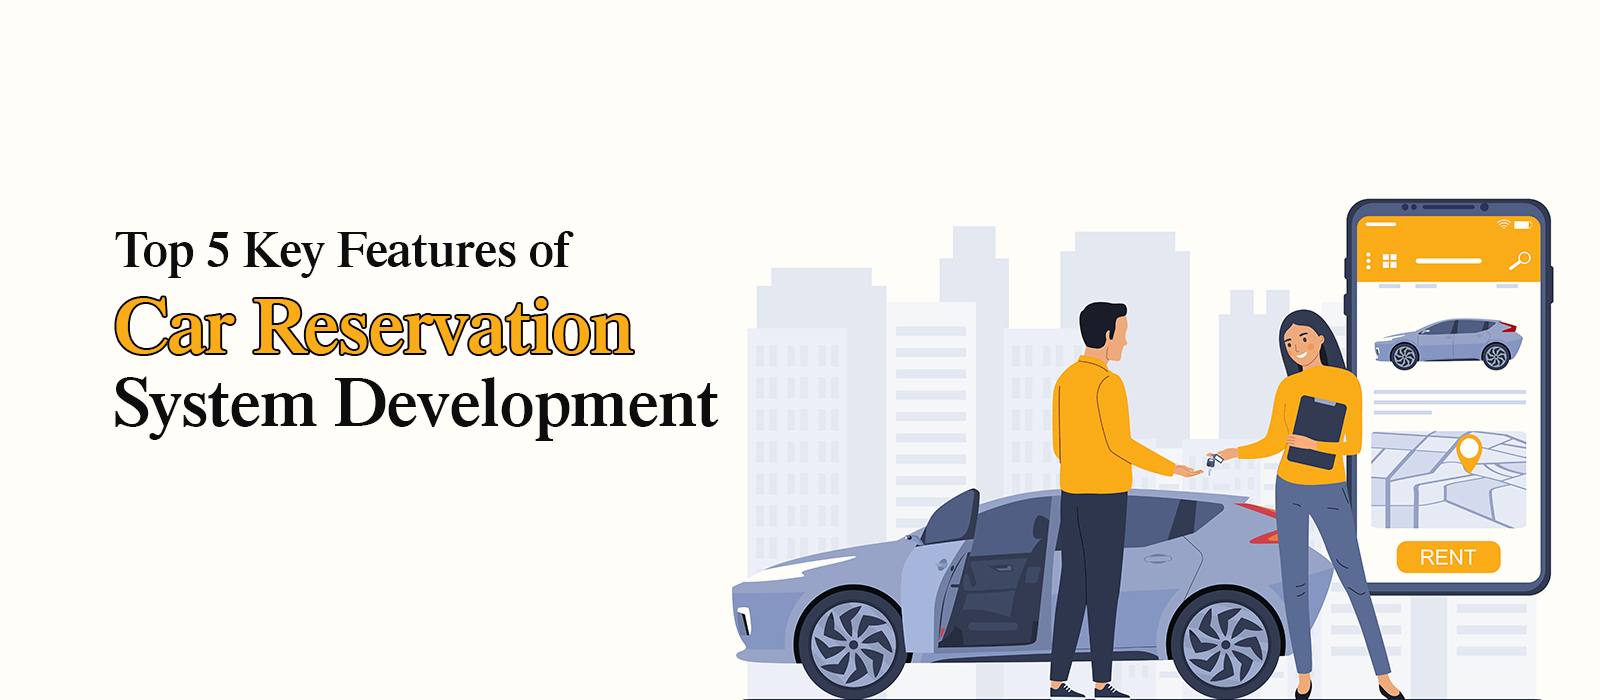 Top 5 Key Features of Car Reservation System Development